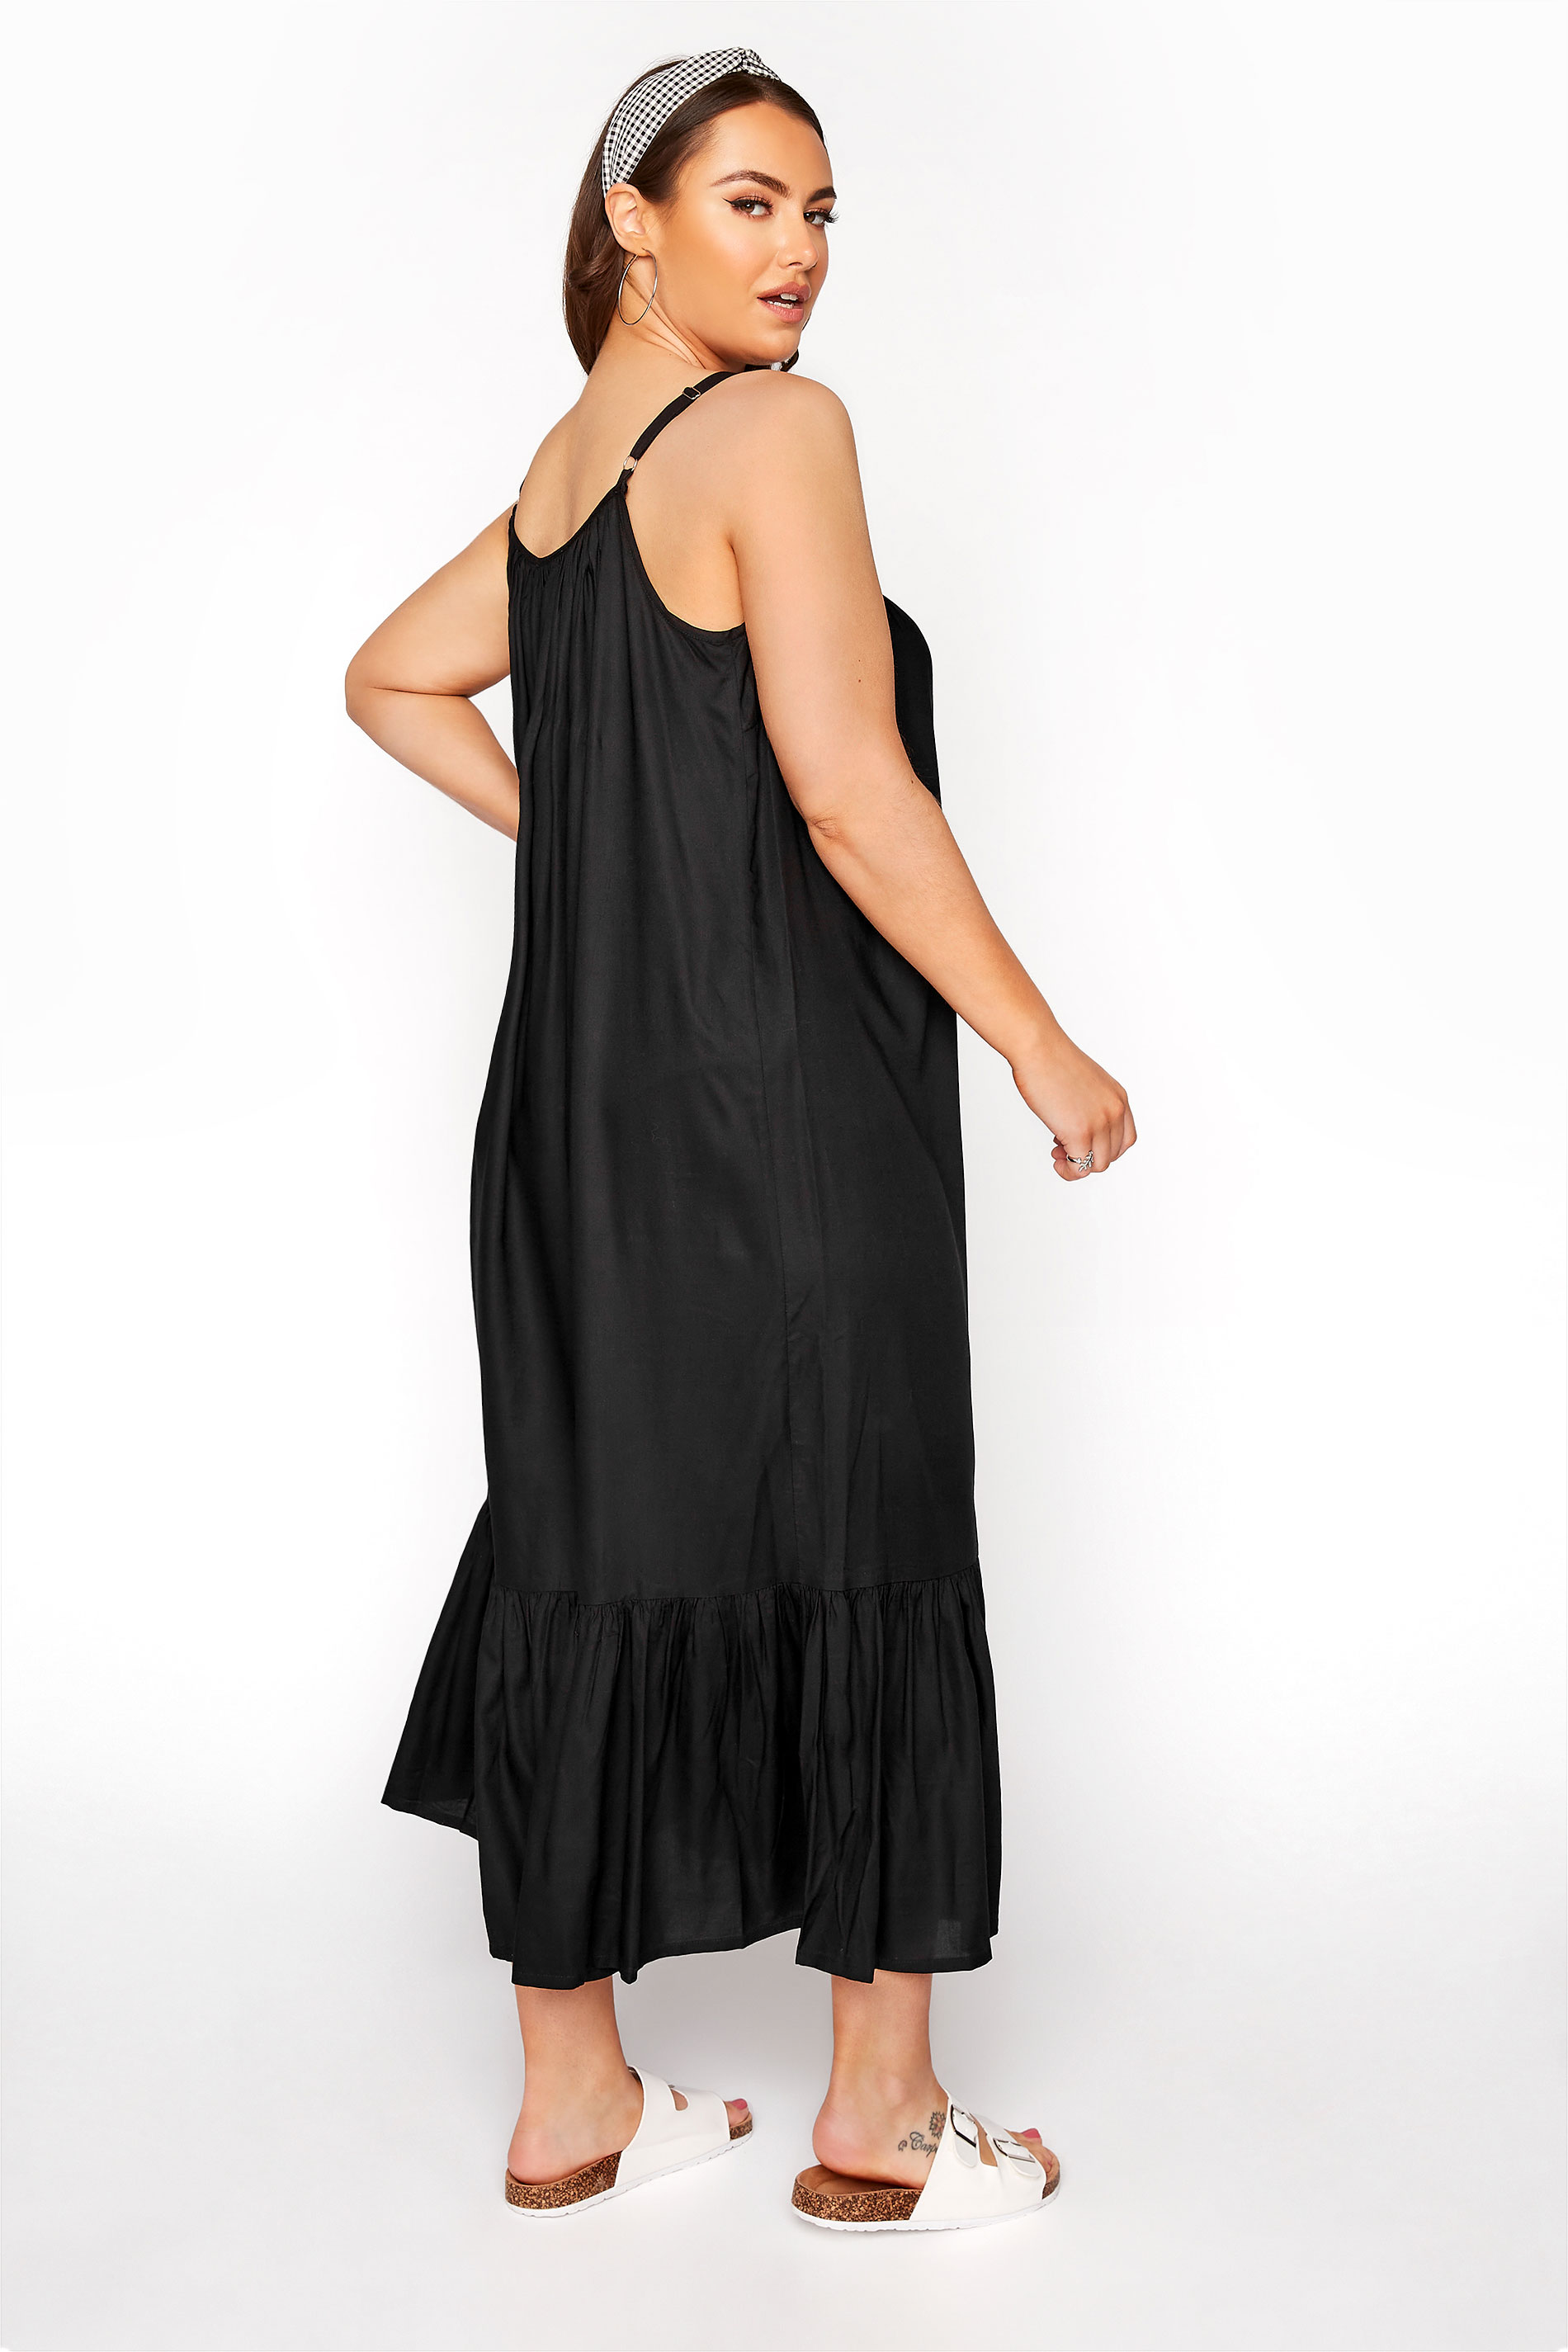 Black Strappy Beach Dress | Yours Clothing